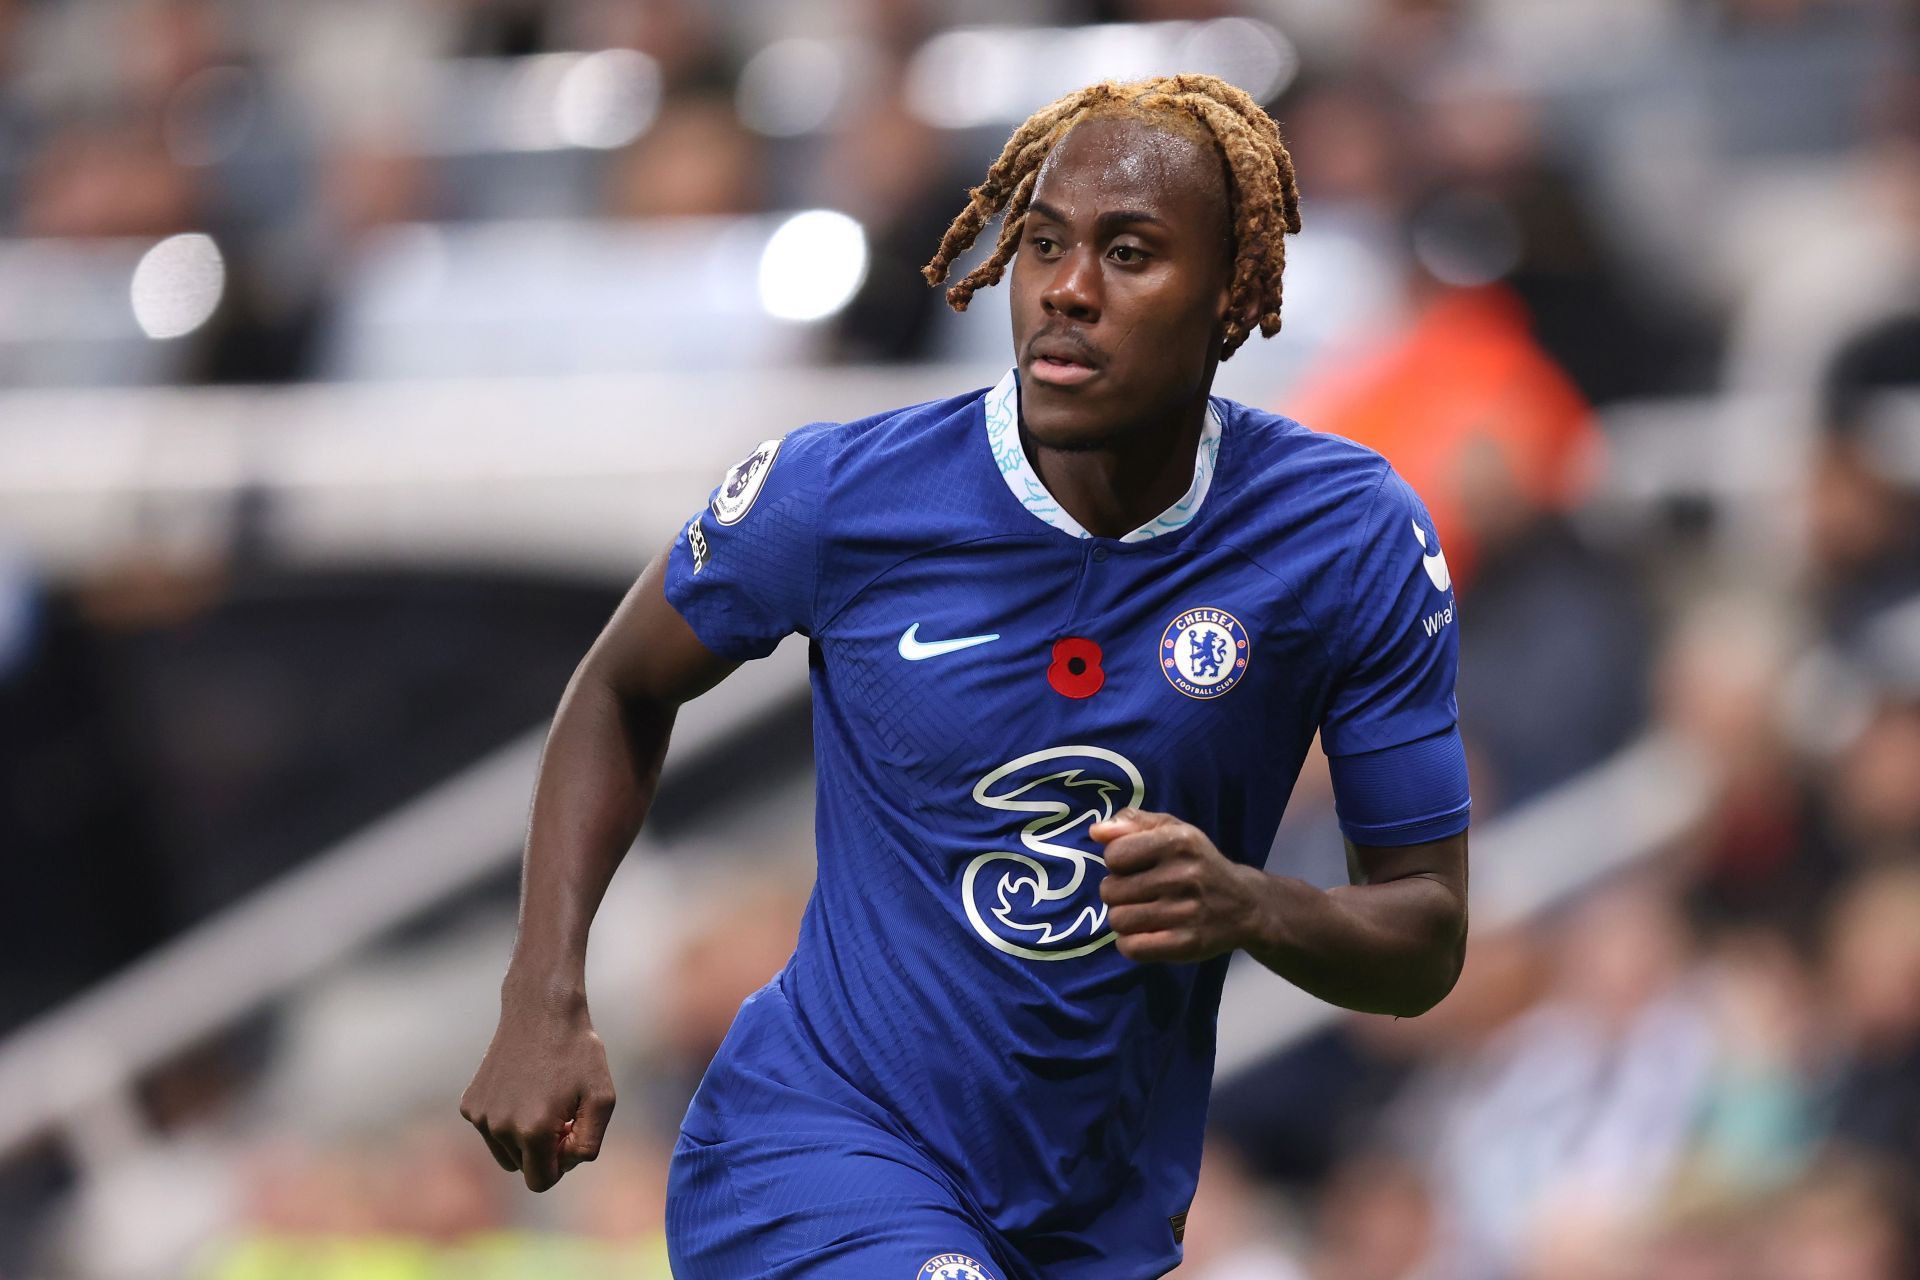 Trevoh Chalobah signed a contract extension at Stamford Bridge.